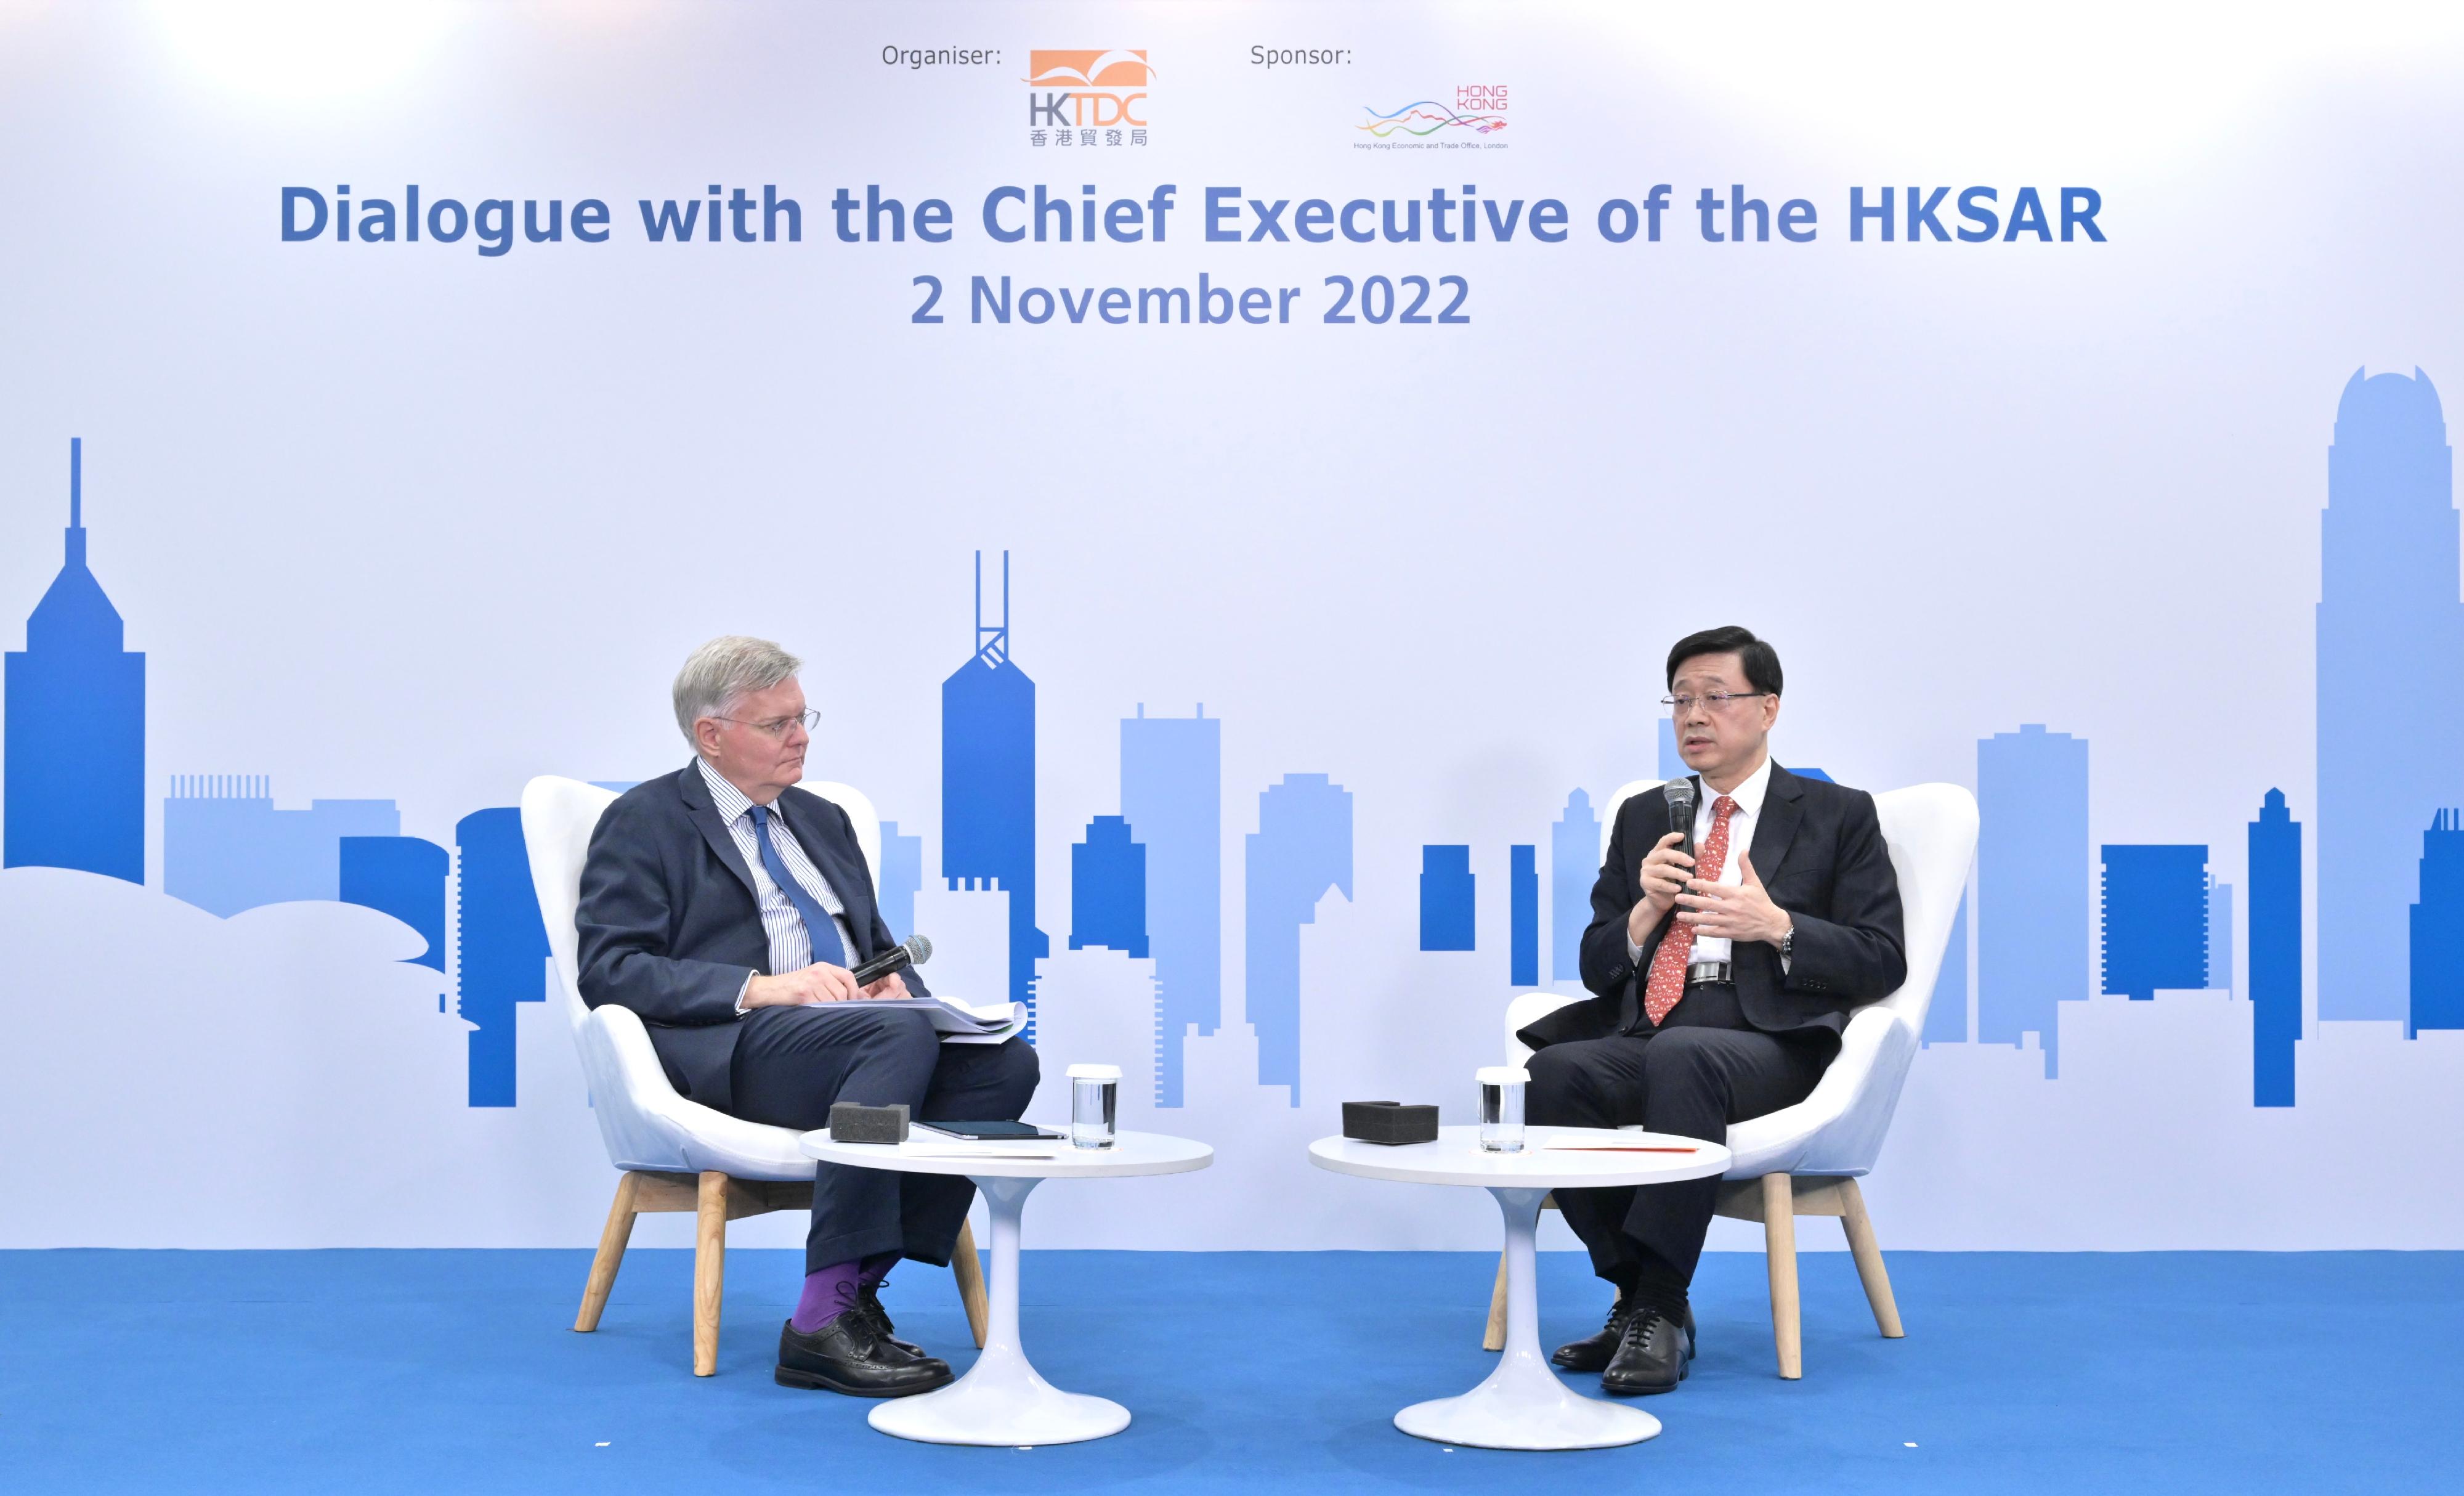 The Chief Executive, Mr John Lee (right), attended the "Dialogue with the Chief Executive of the HKSAR" webinar organised by the Hong Kong Trade Development Council today (November 2).